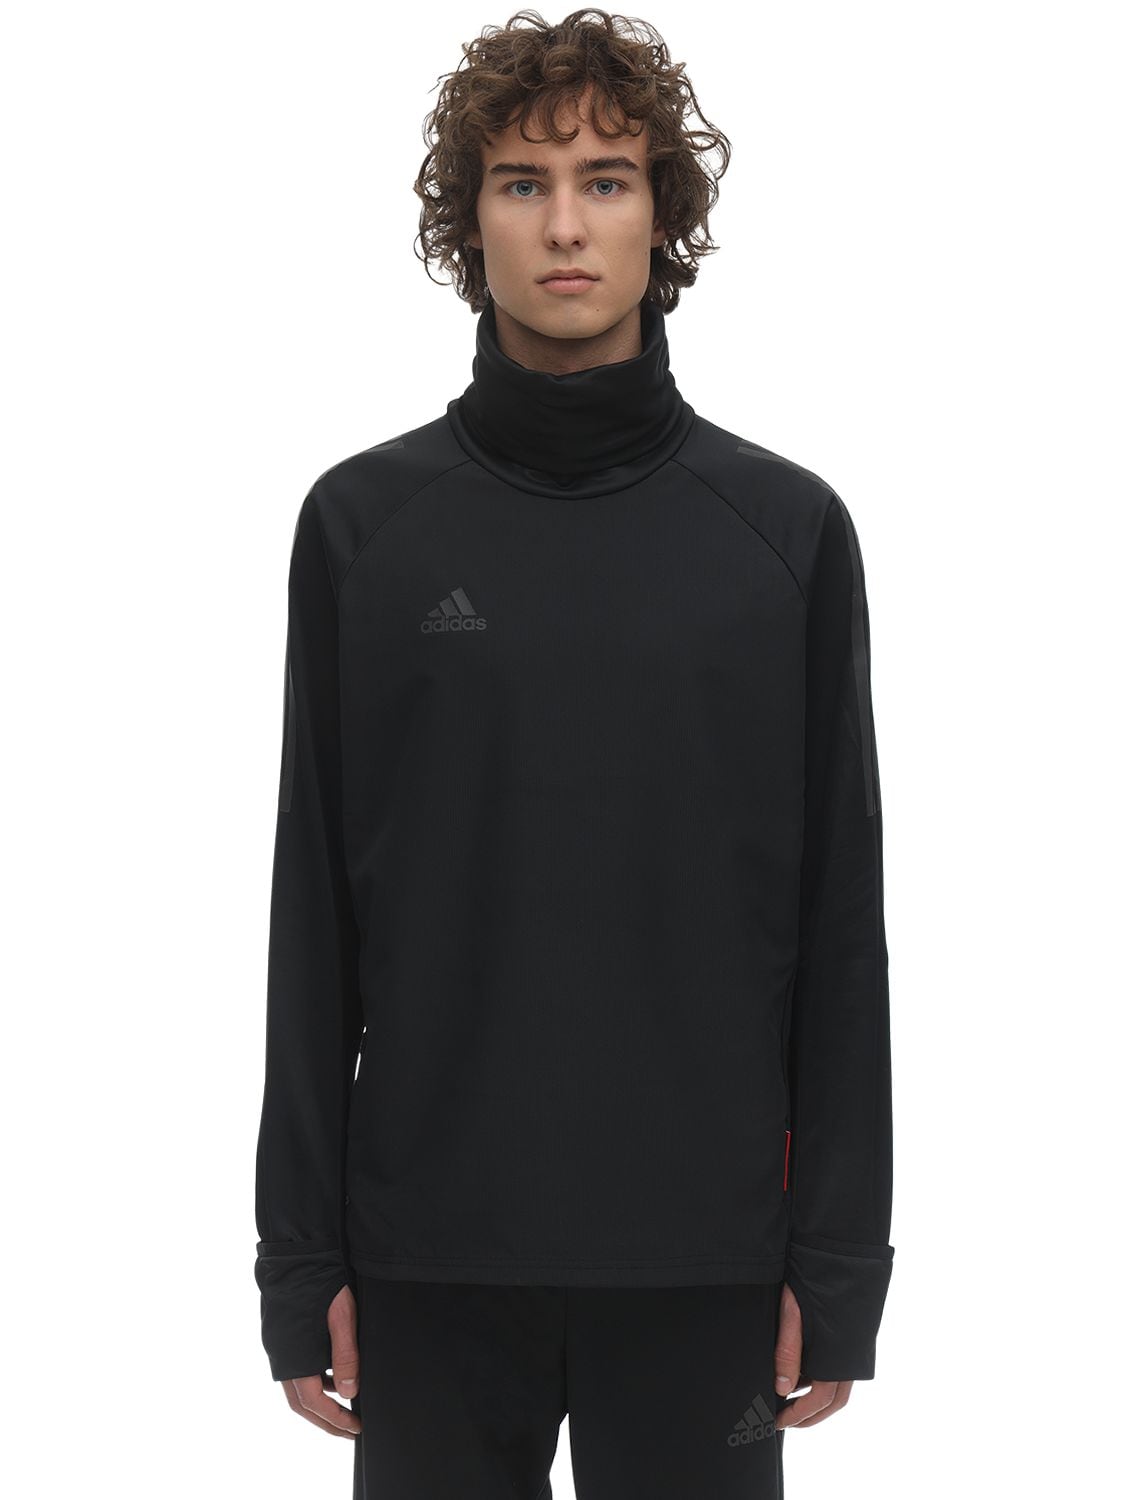 Adidas Football Long Sleeved Tech Warm-up Top In Black